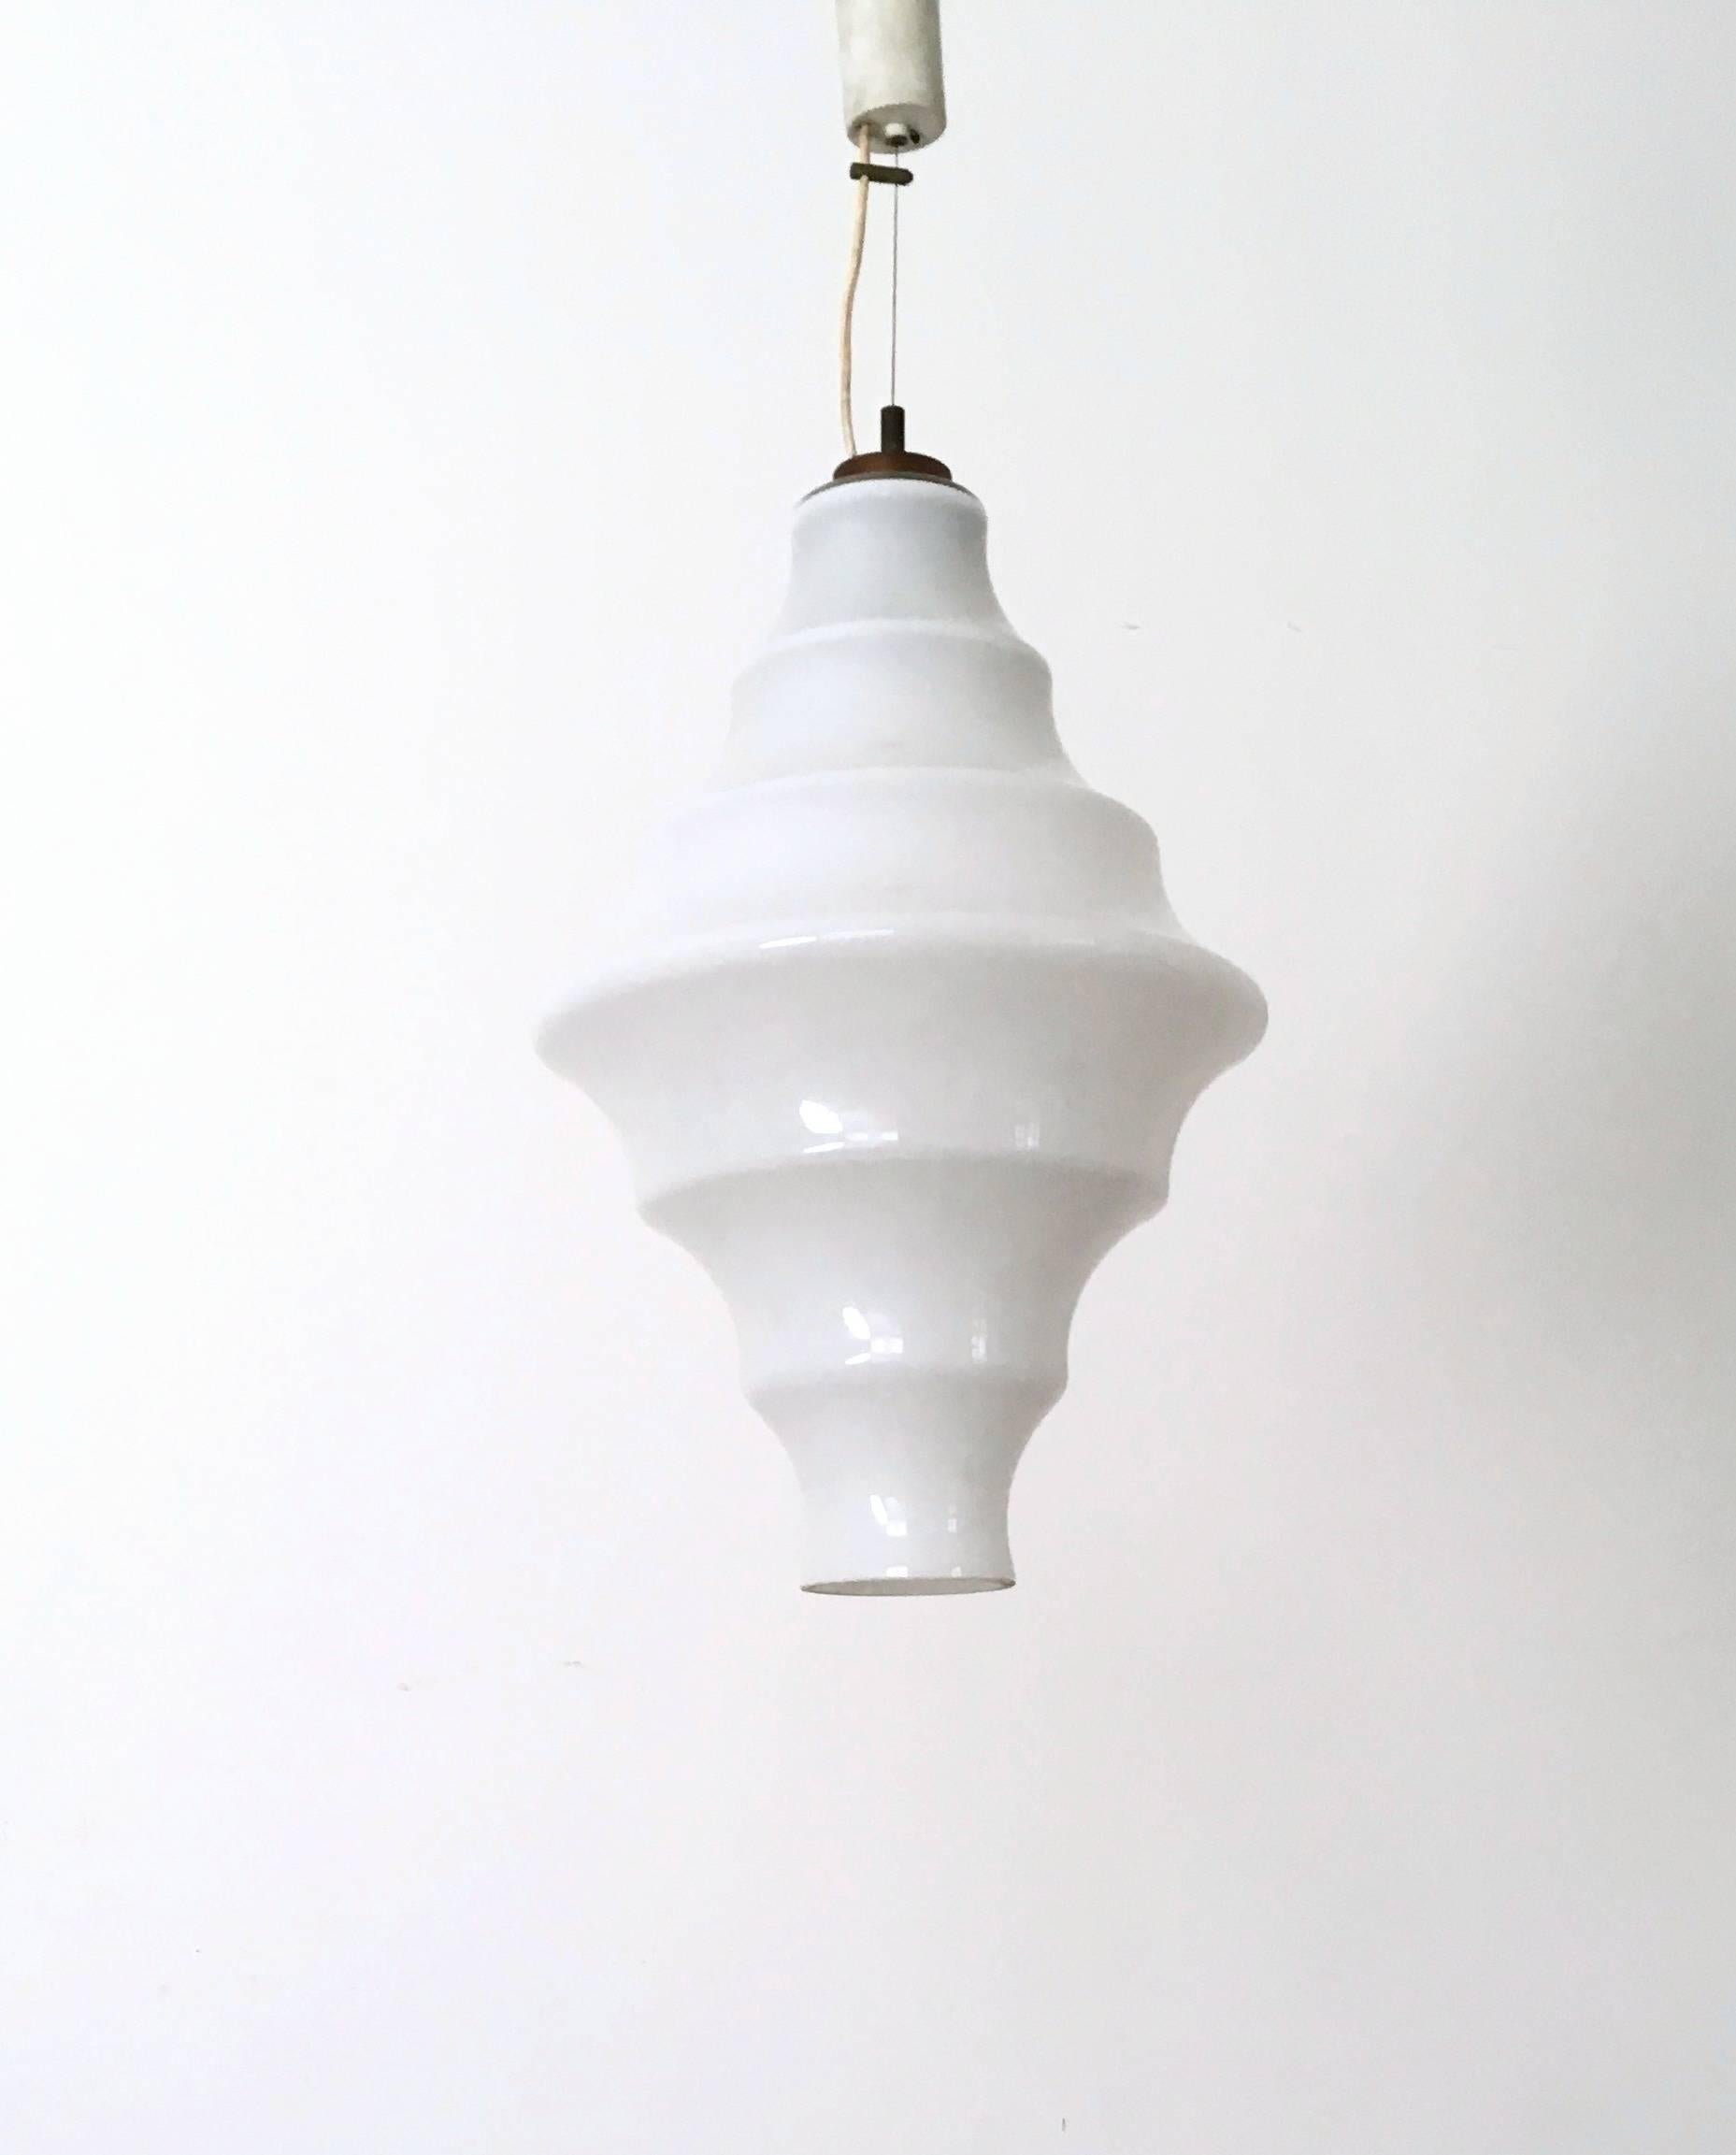 This pendant light was designed by Carlo Nason for Mazzega, Venice in the 1960s. It has an unusual scalloped blown white glass shade with adjustable wire.

Very good quality.